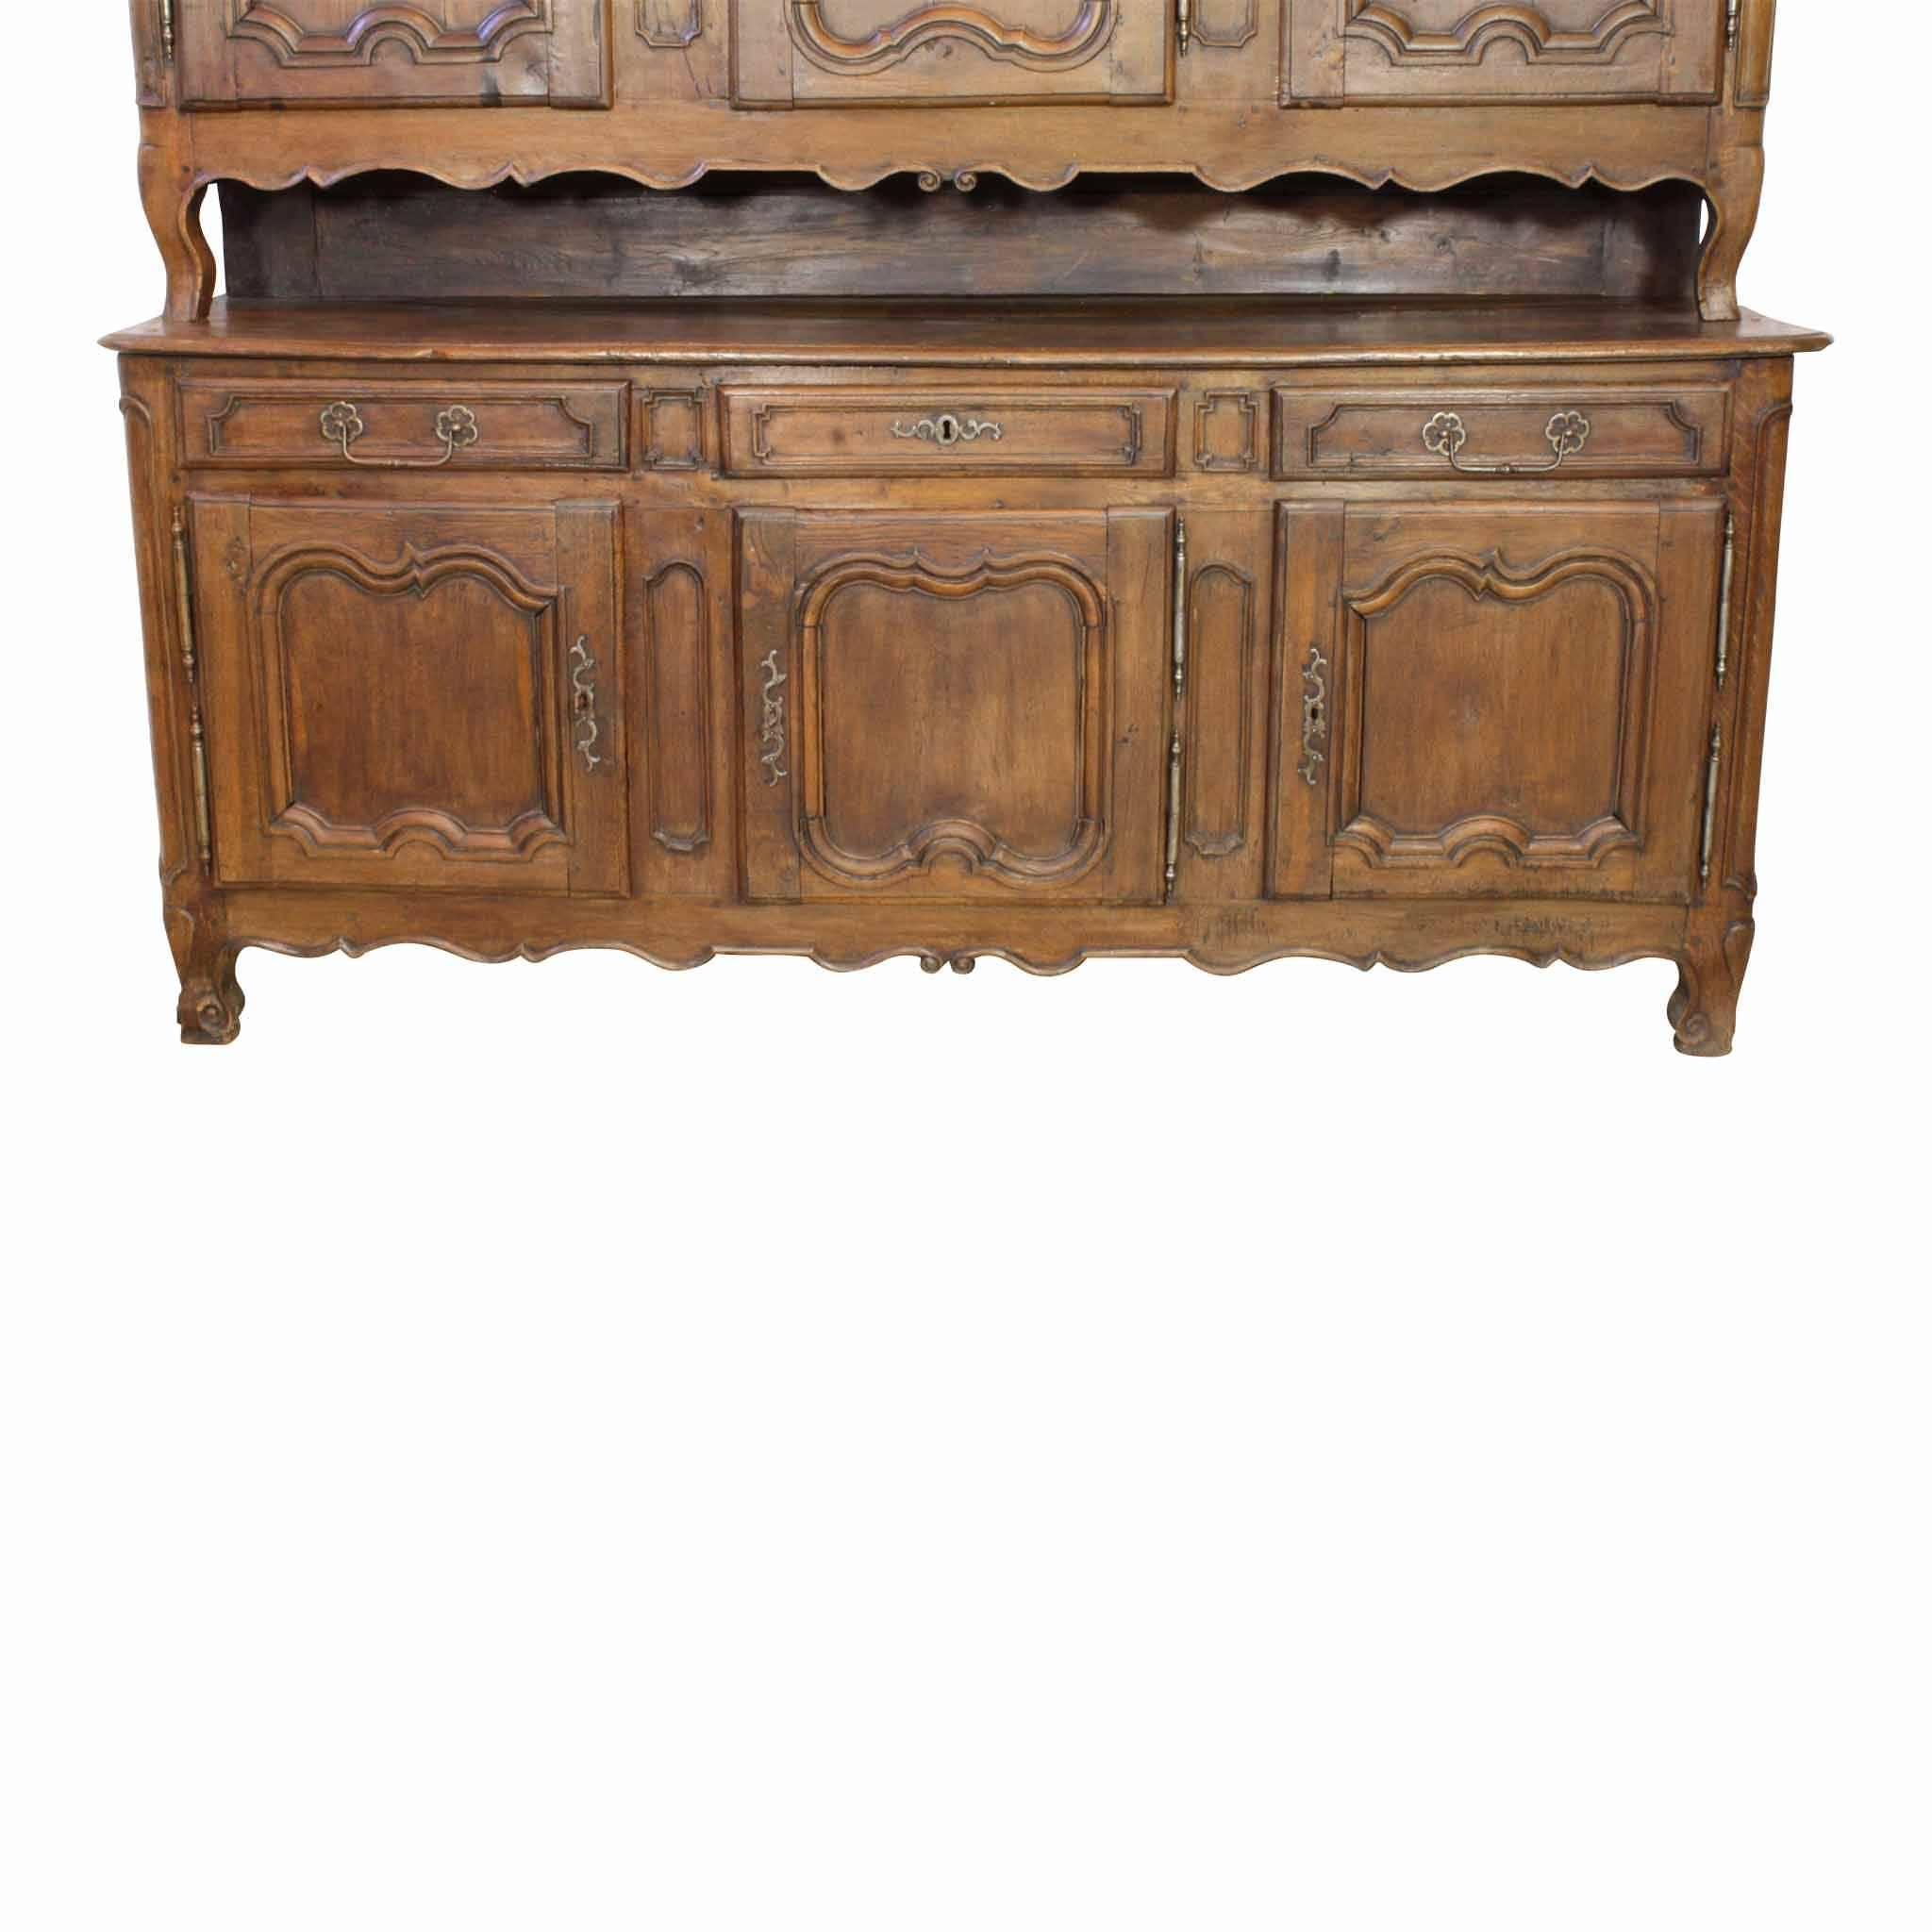 This substantial French deux corps cabinet is double bodied with the upper portion slightly narrower than the lower portion. Both have a single adjustable shelf. The lower potion height is 37.5 inches. Keys included.